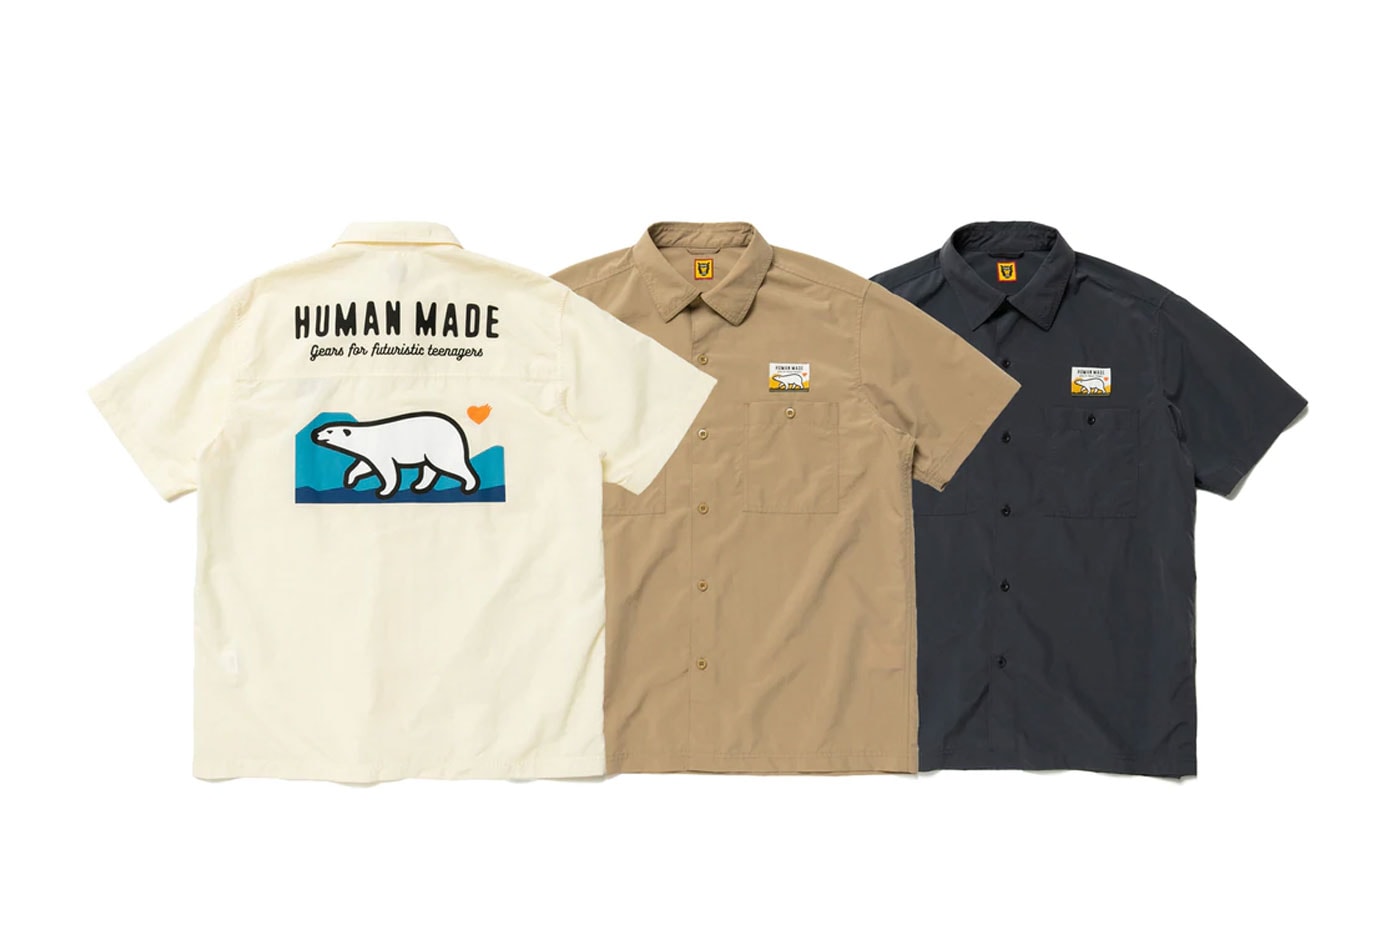 Human Made Summer Camp capsule collection june 11 shirts shorts t shirts caps hats bags towel blanket camper tin release info date price